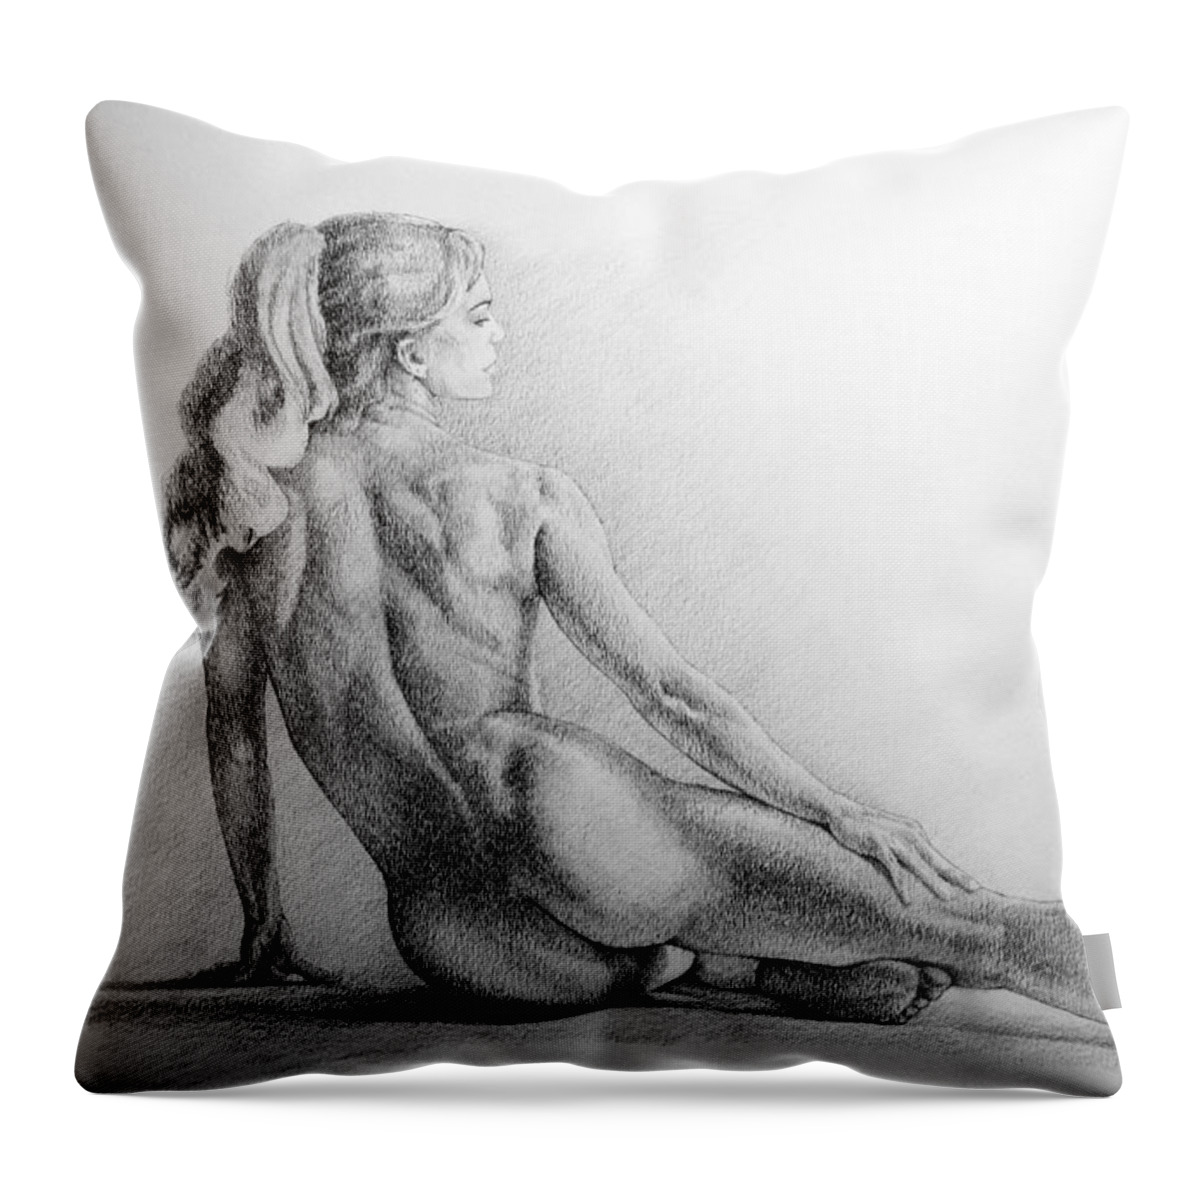 Erotic Throw Pillow featuring the drawing Page 16 by Dimitar Hristov